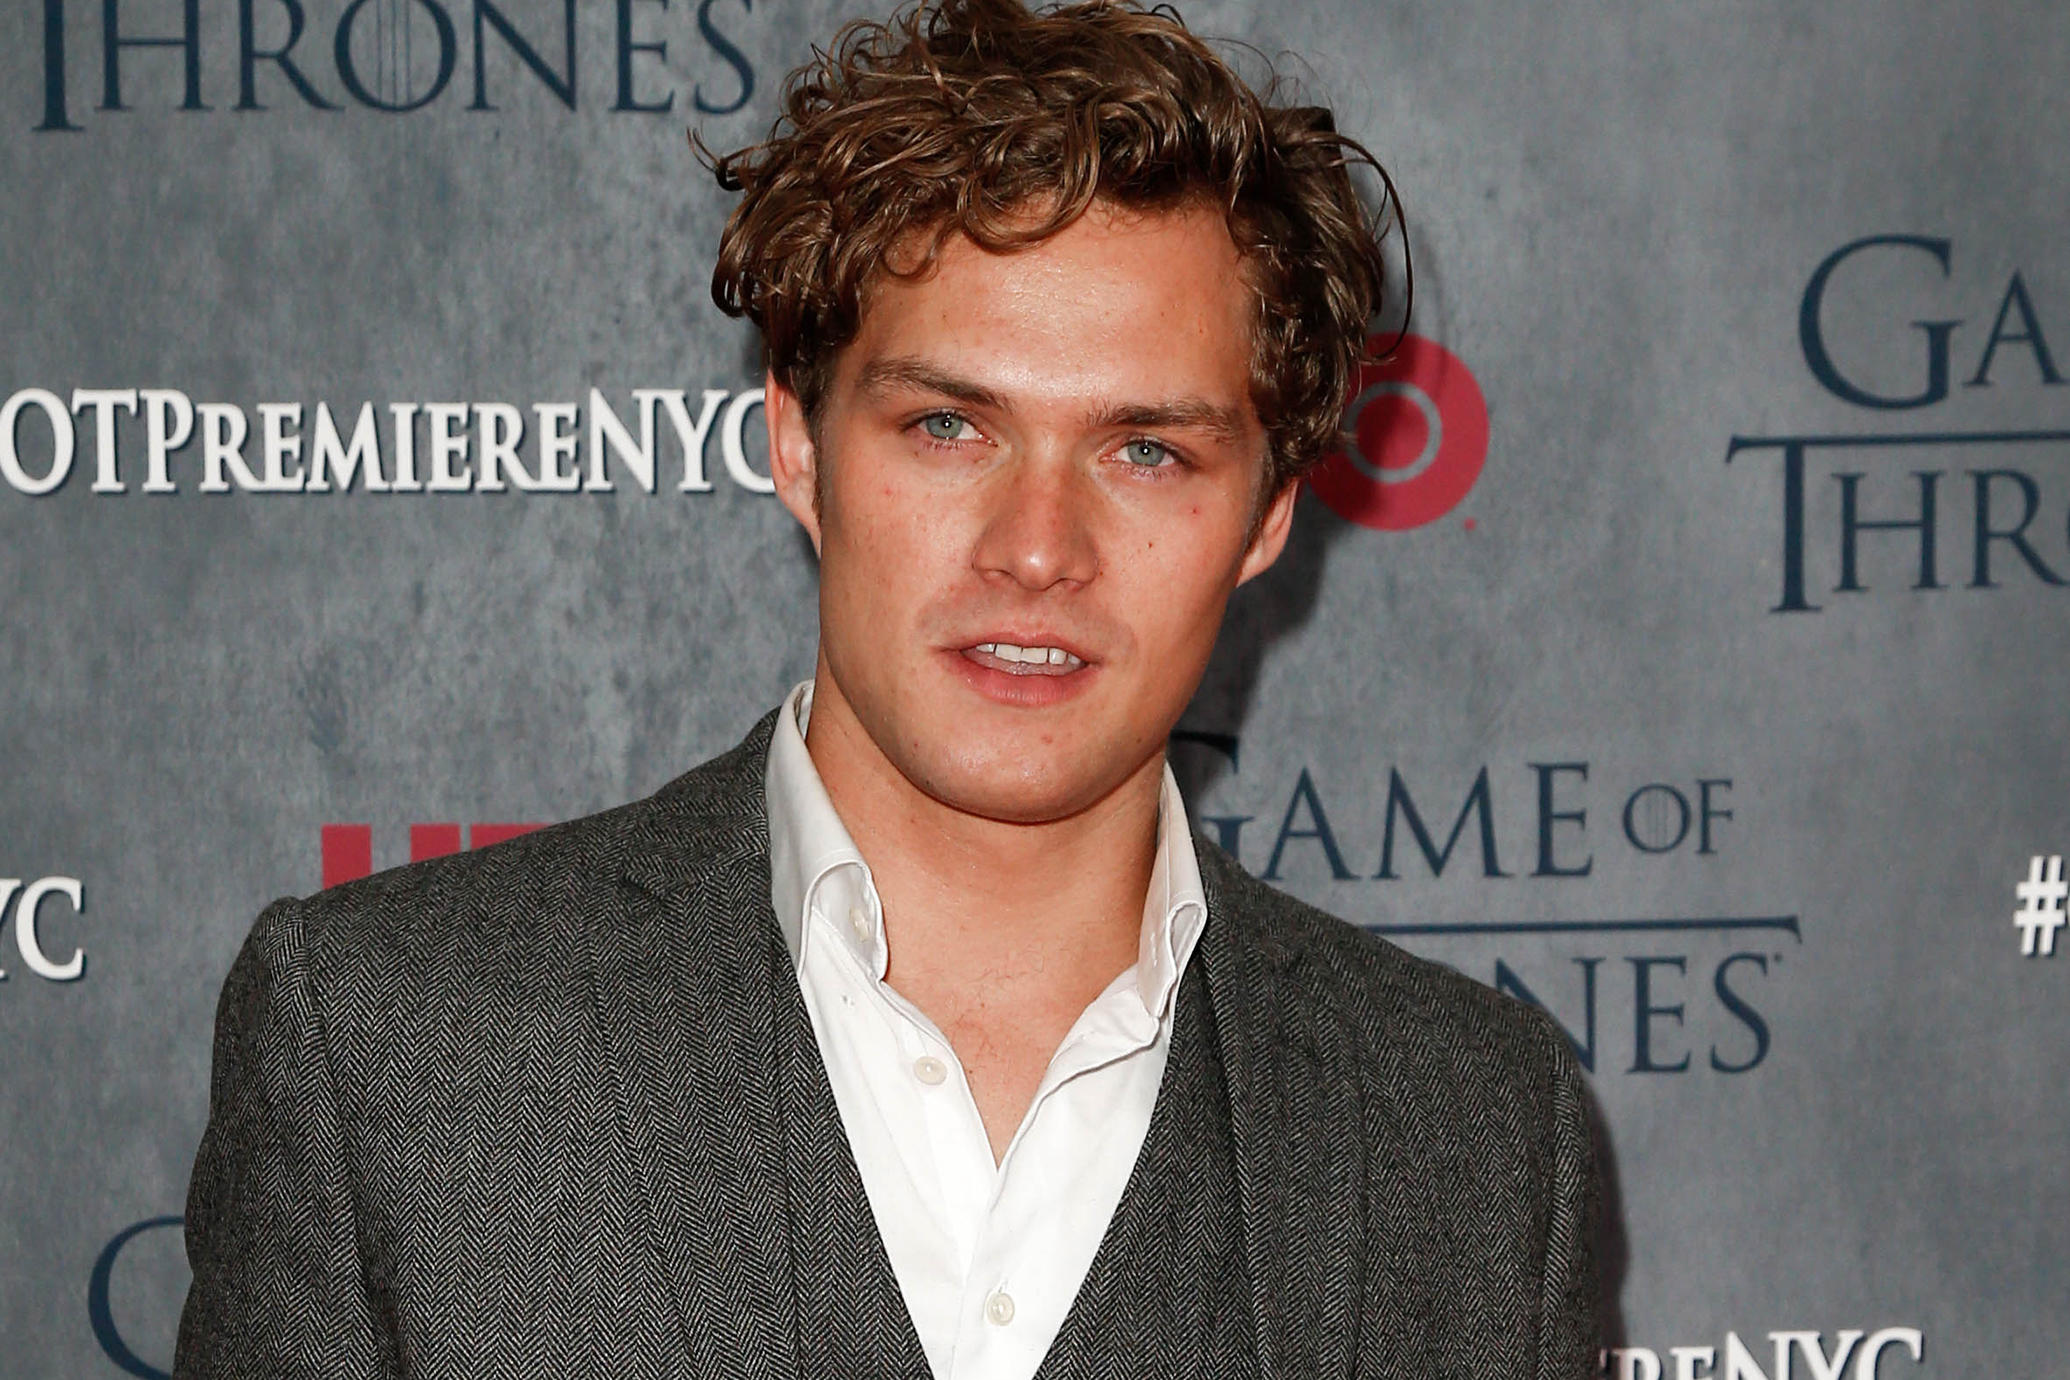 Game of Thrones Star Will Bring the Fury as Marvel's Iron Fist